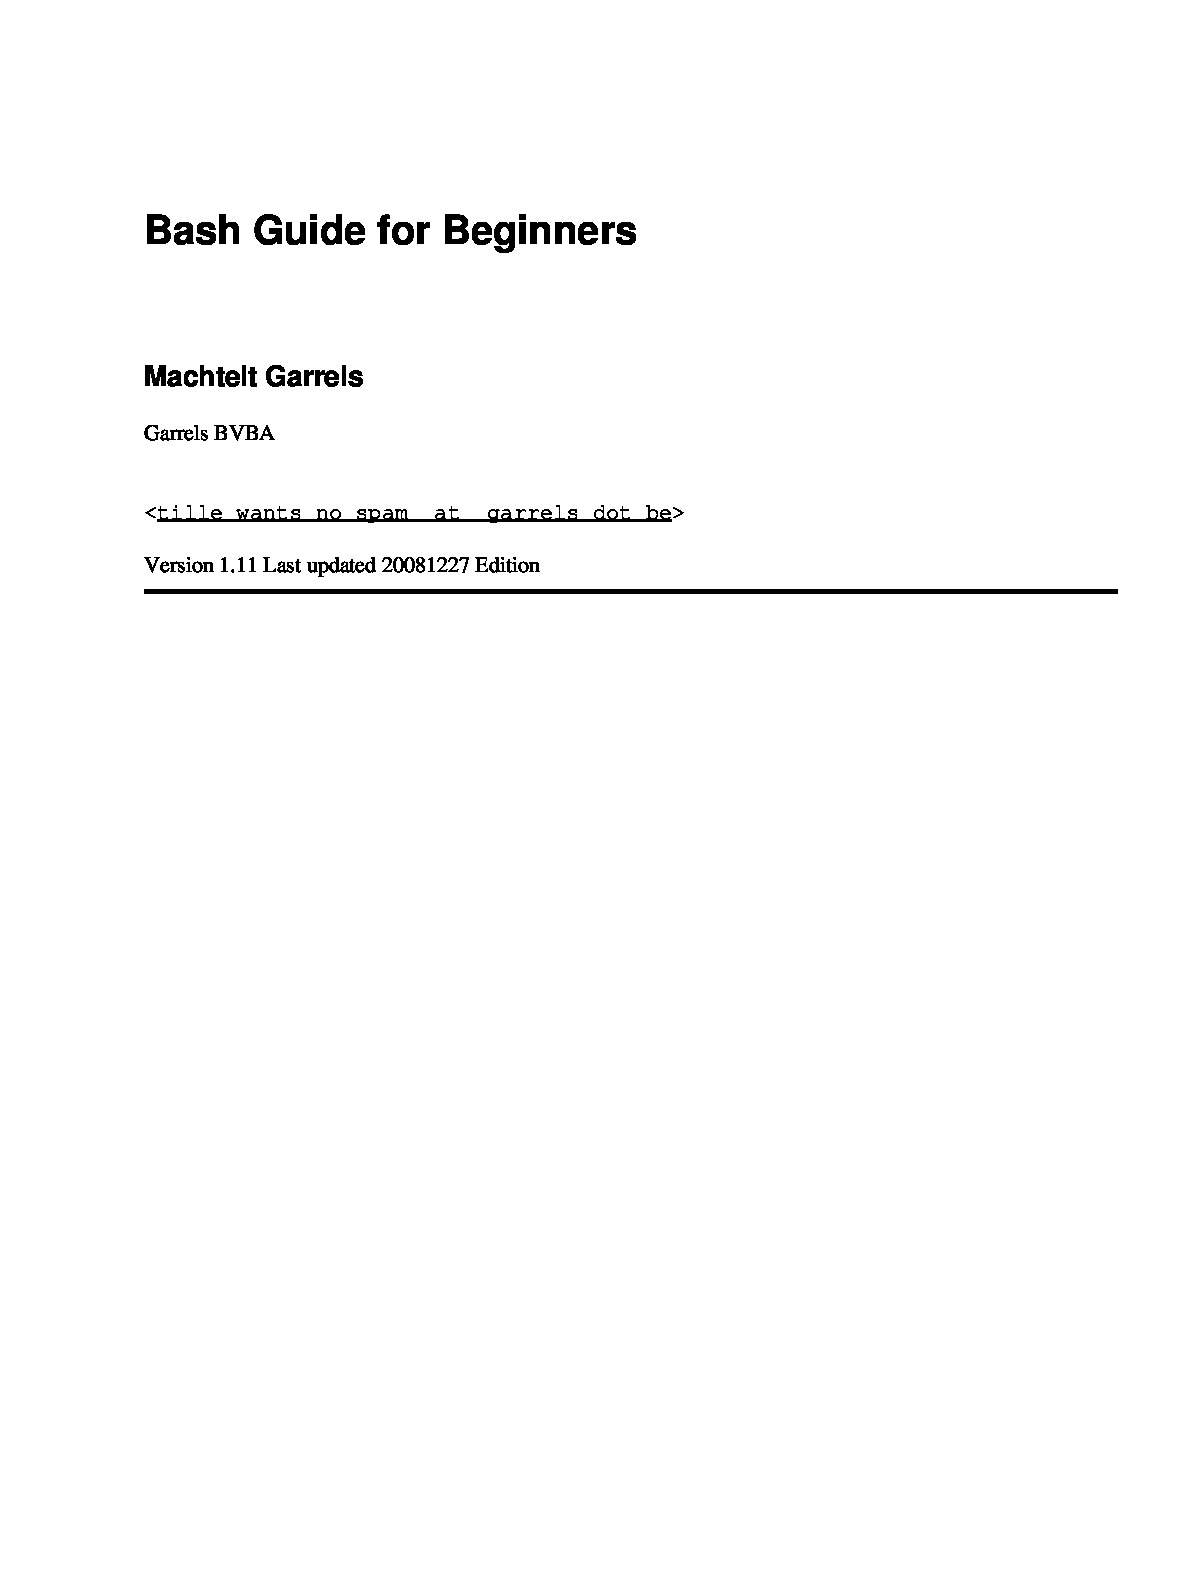 bash_guide_for_beginners